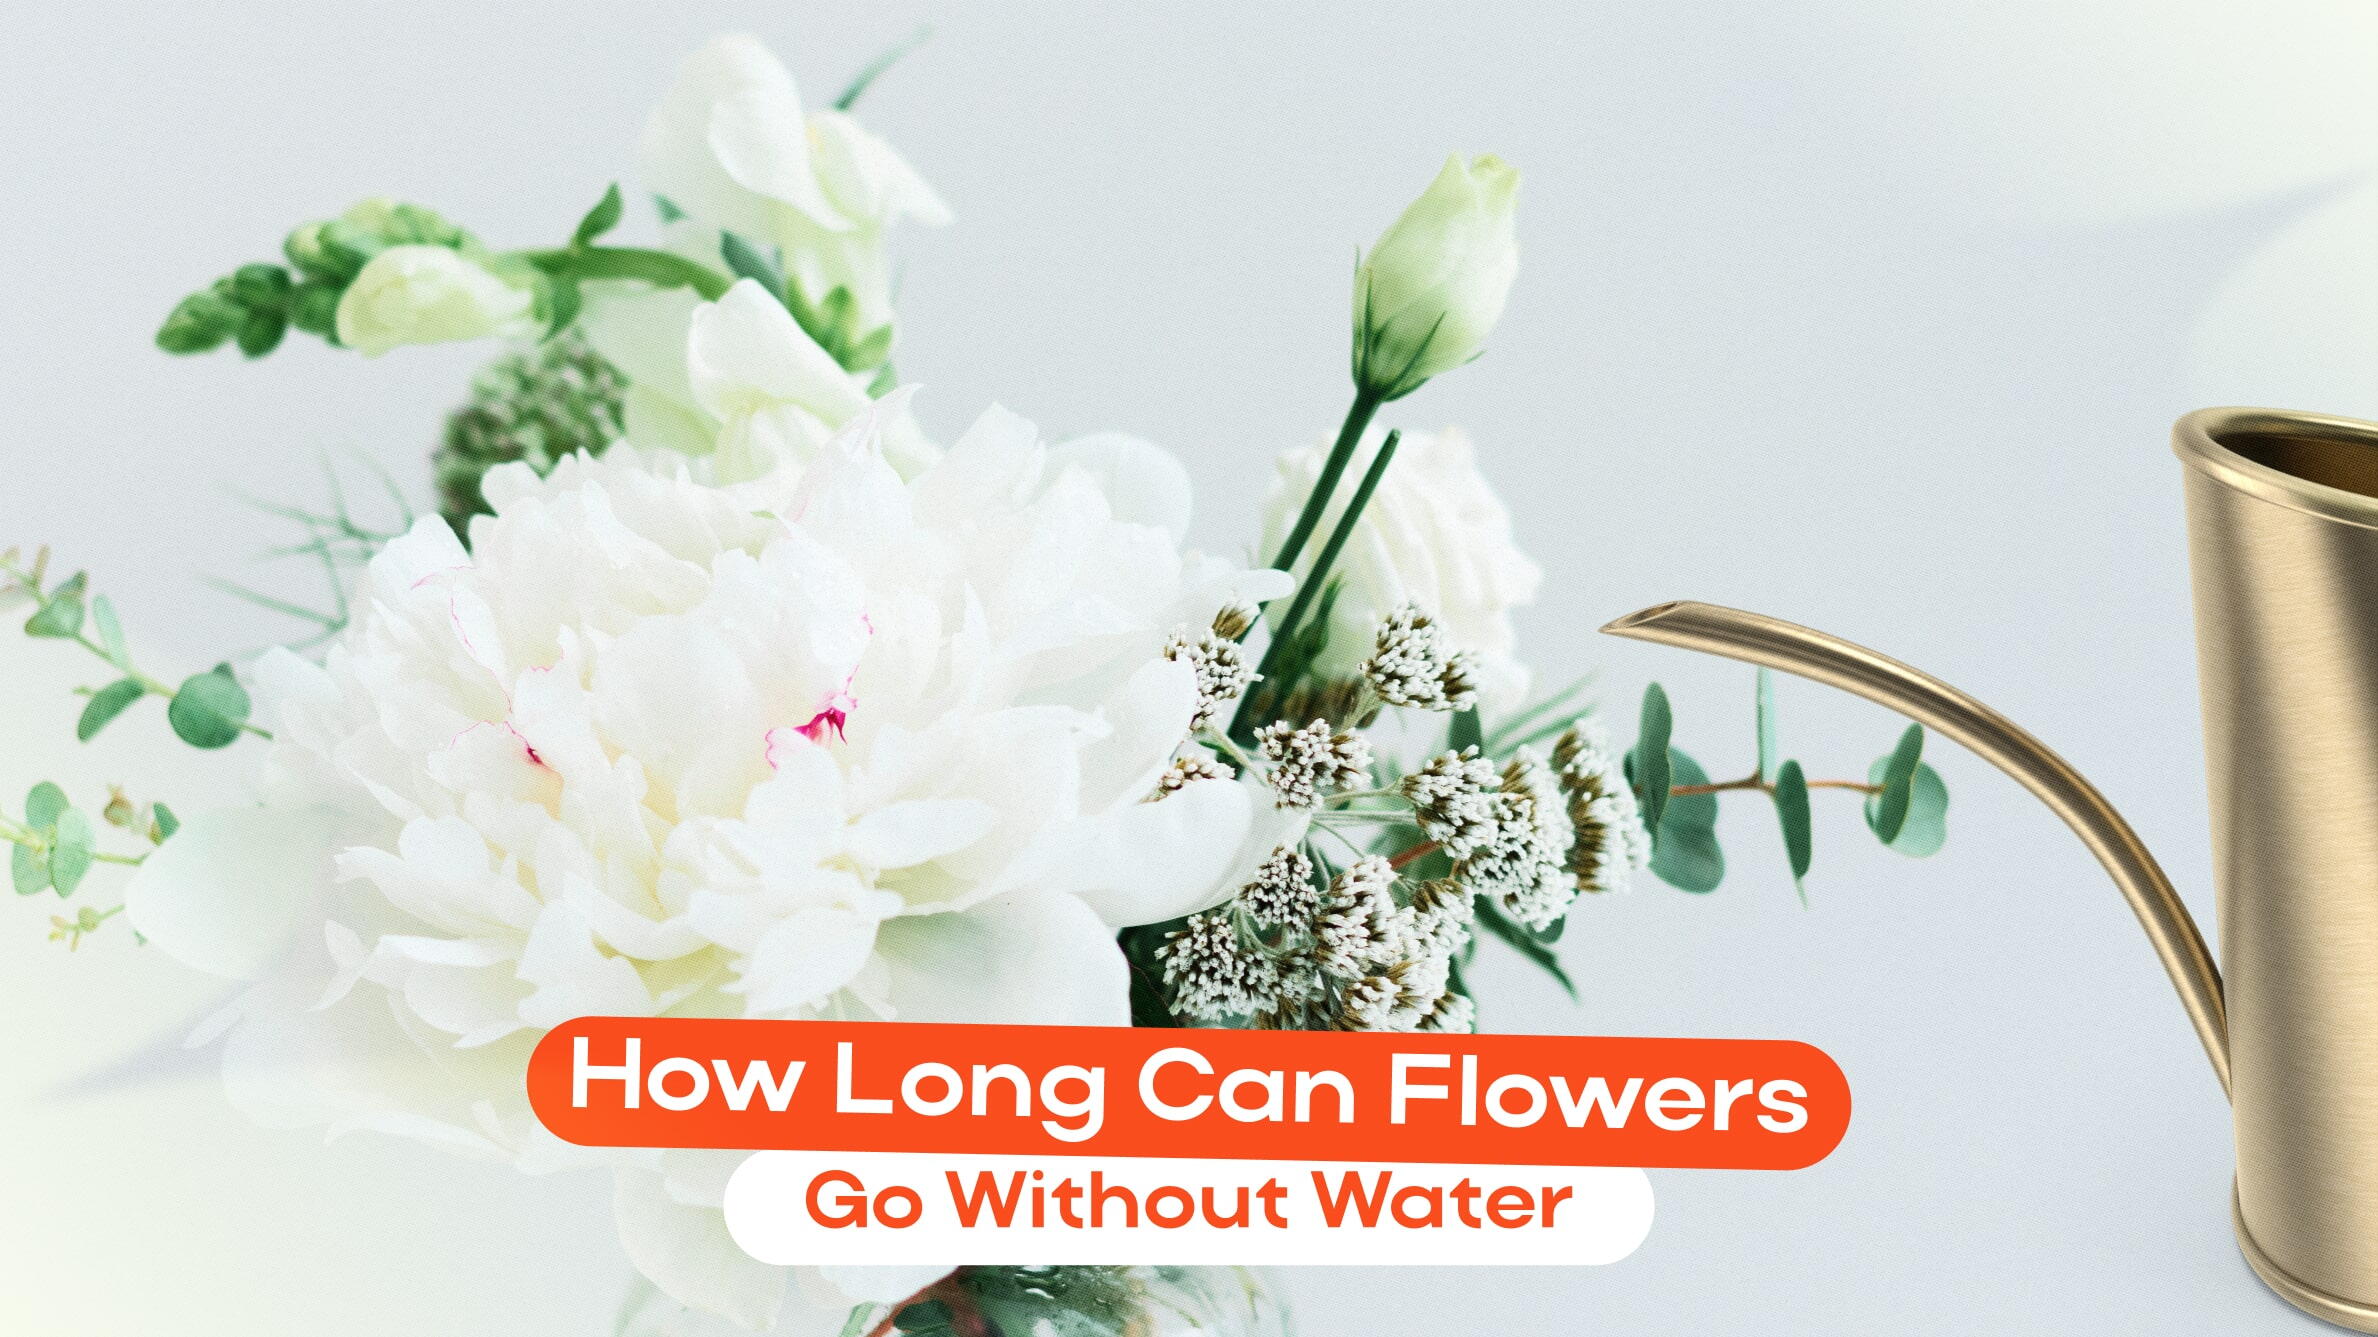 How Long Can Flowers Go Without Water